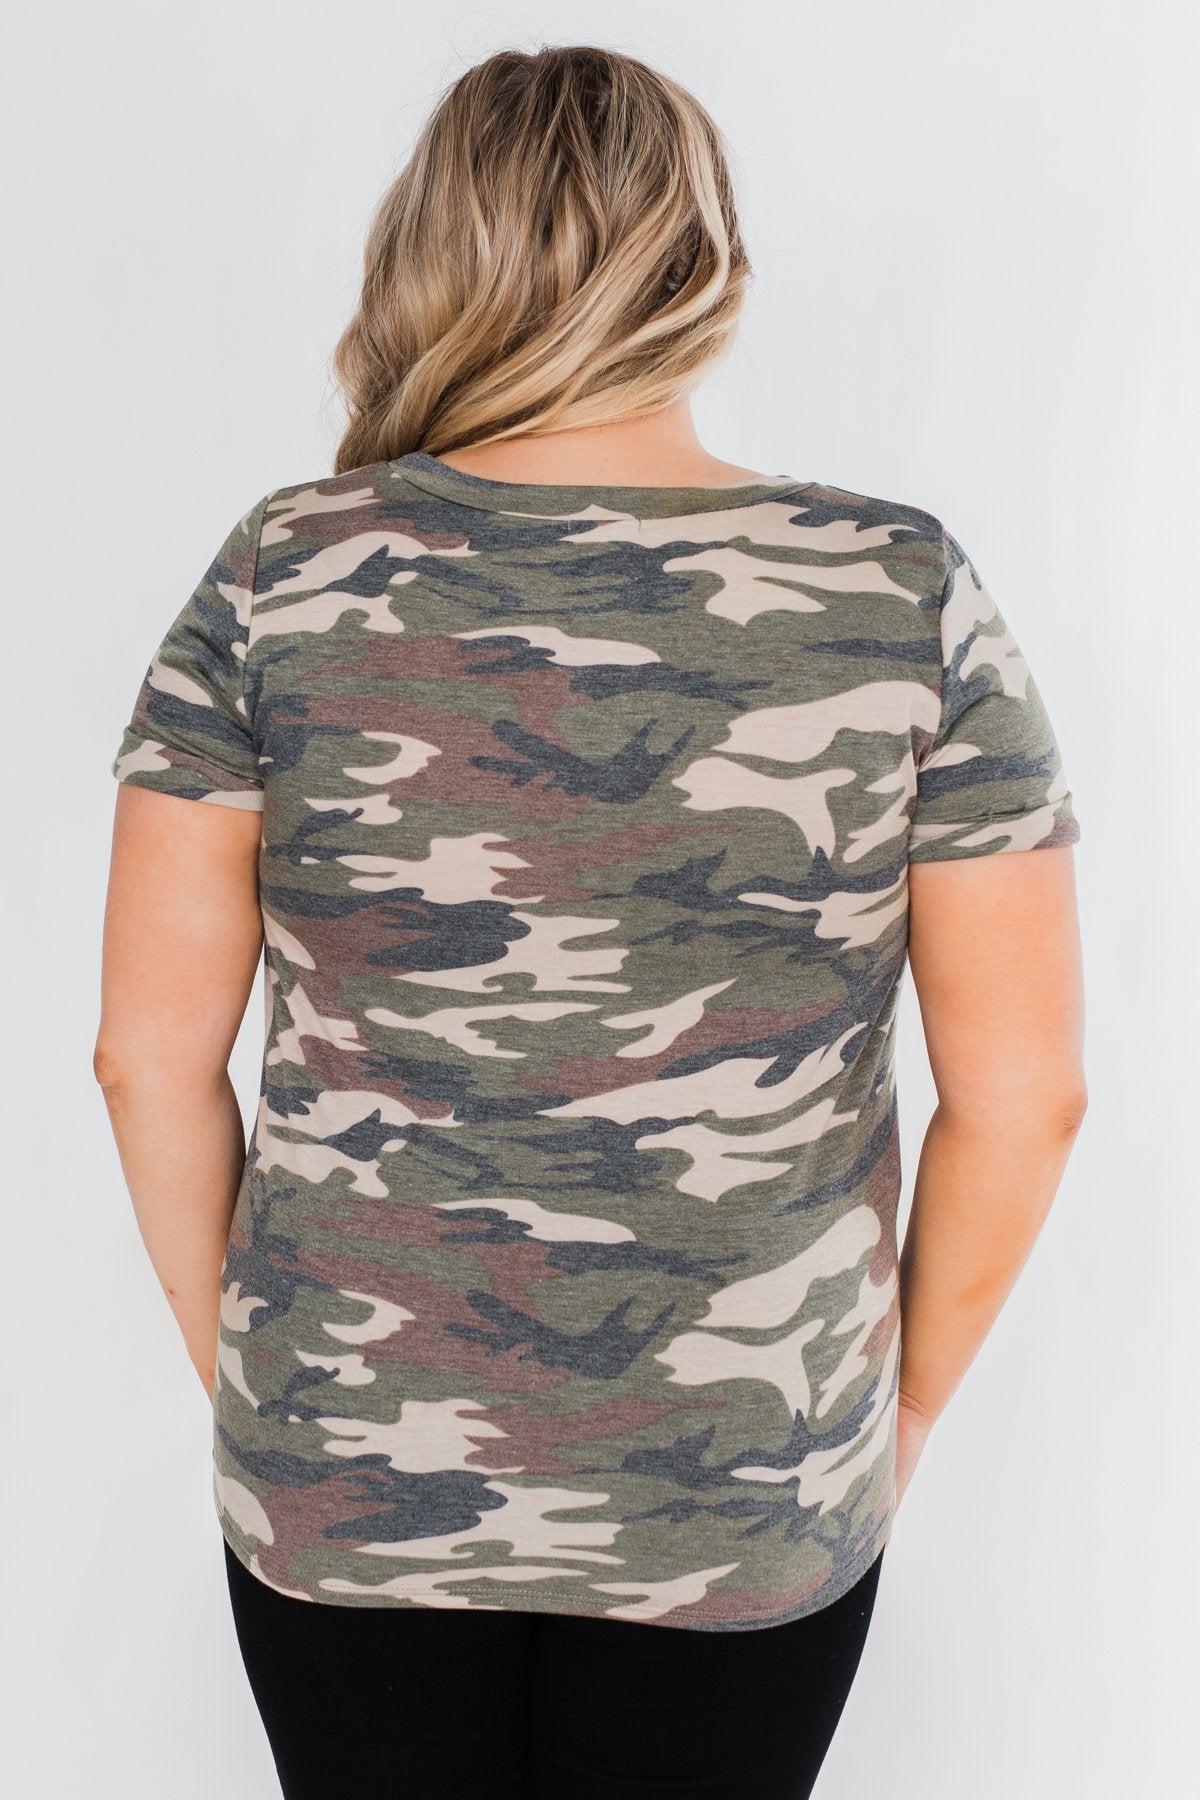 Wouldn't It Be Nice Short Sleeve Top- Camo